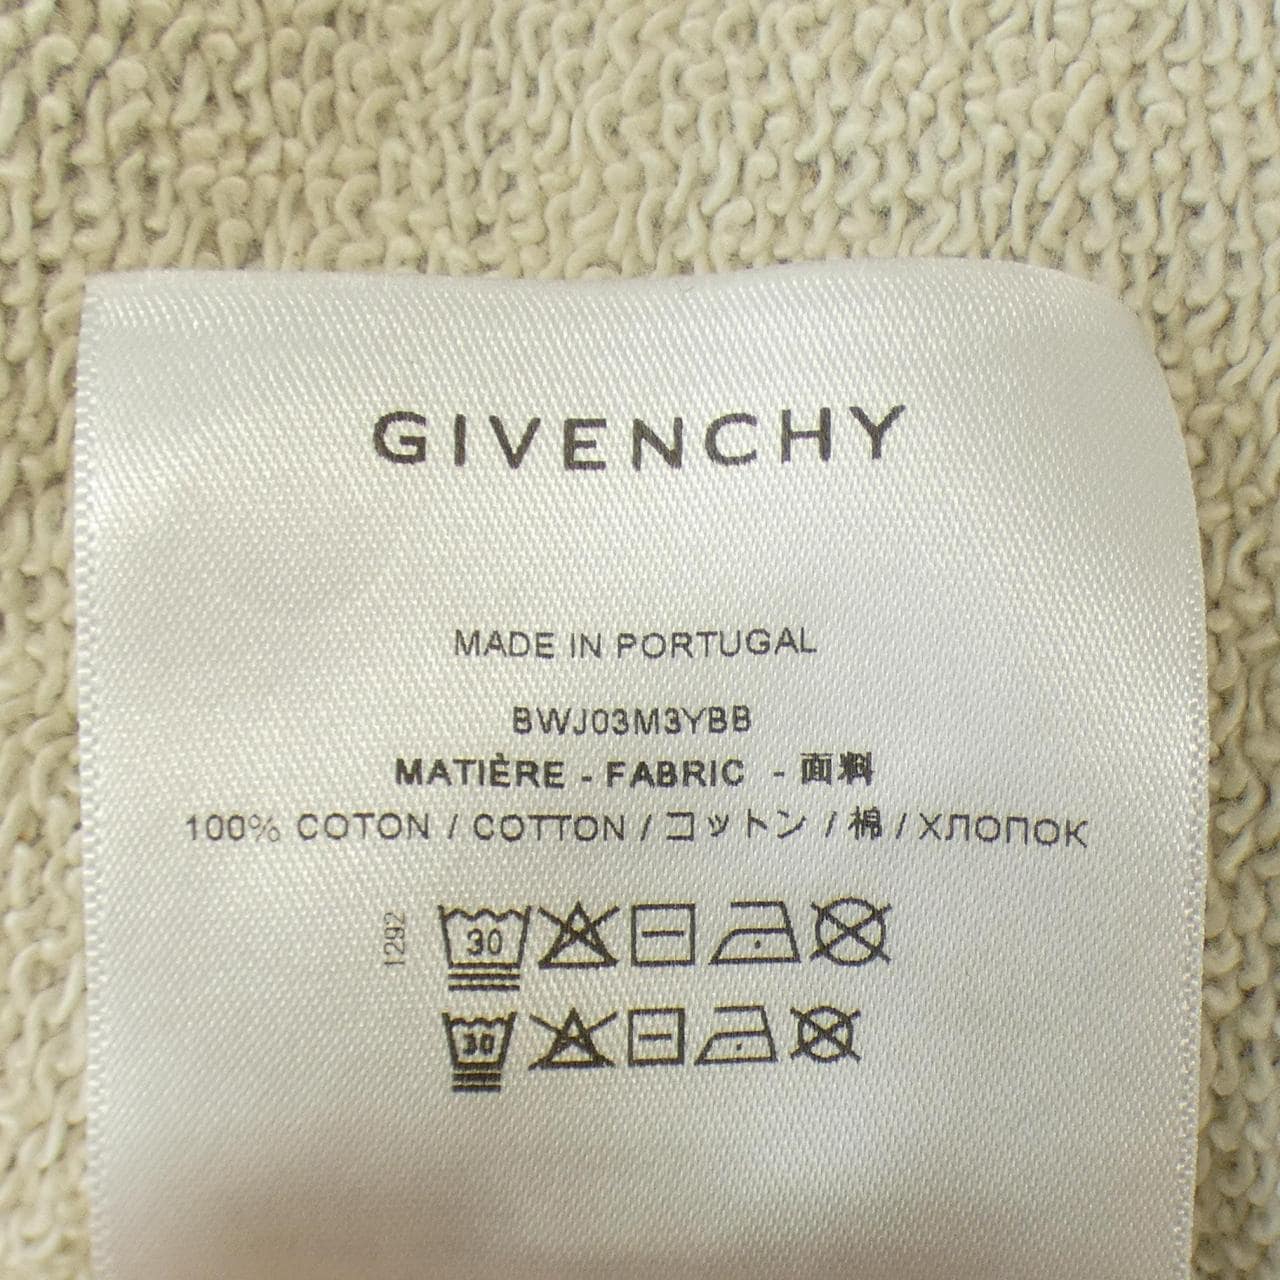 GIVENCHY紀梵希PARKER